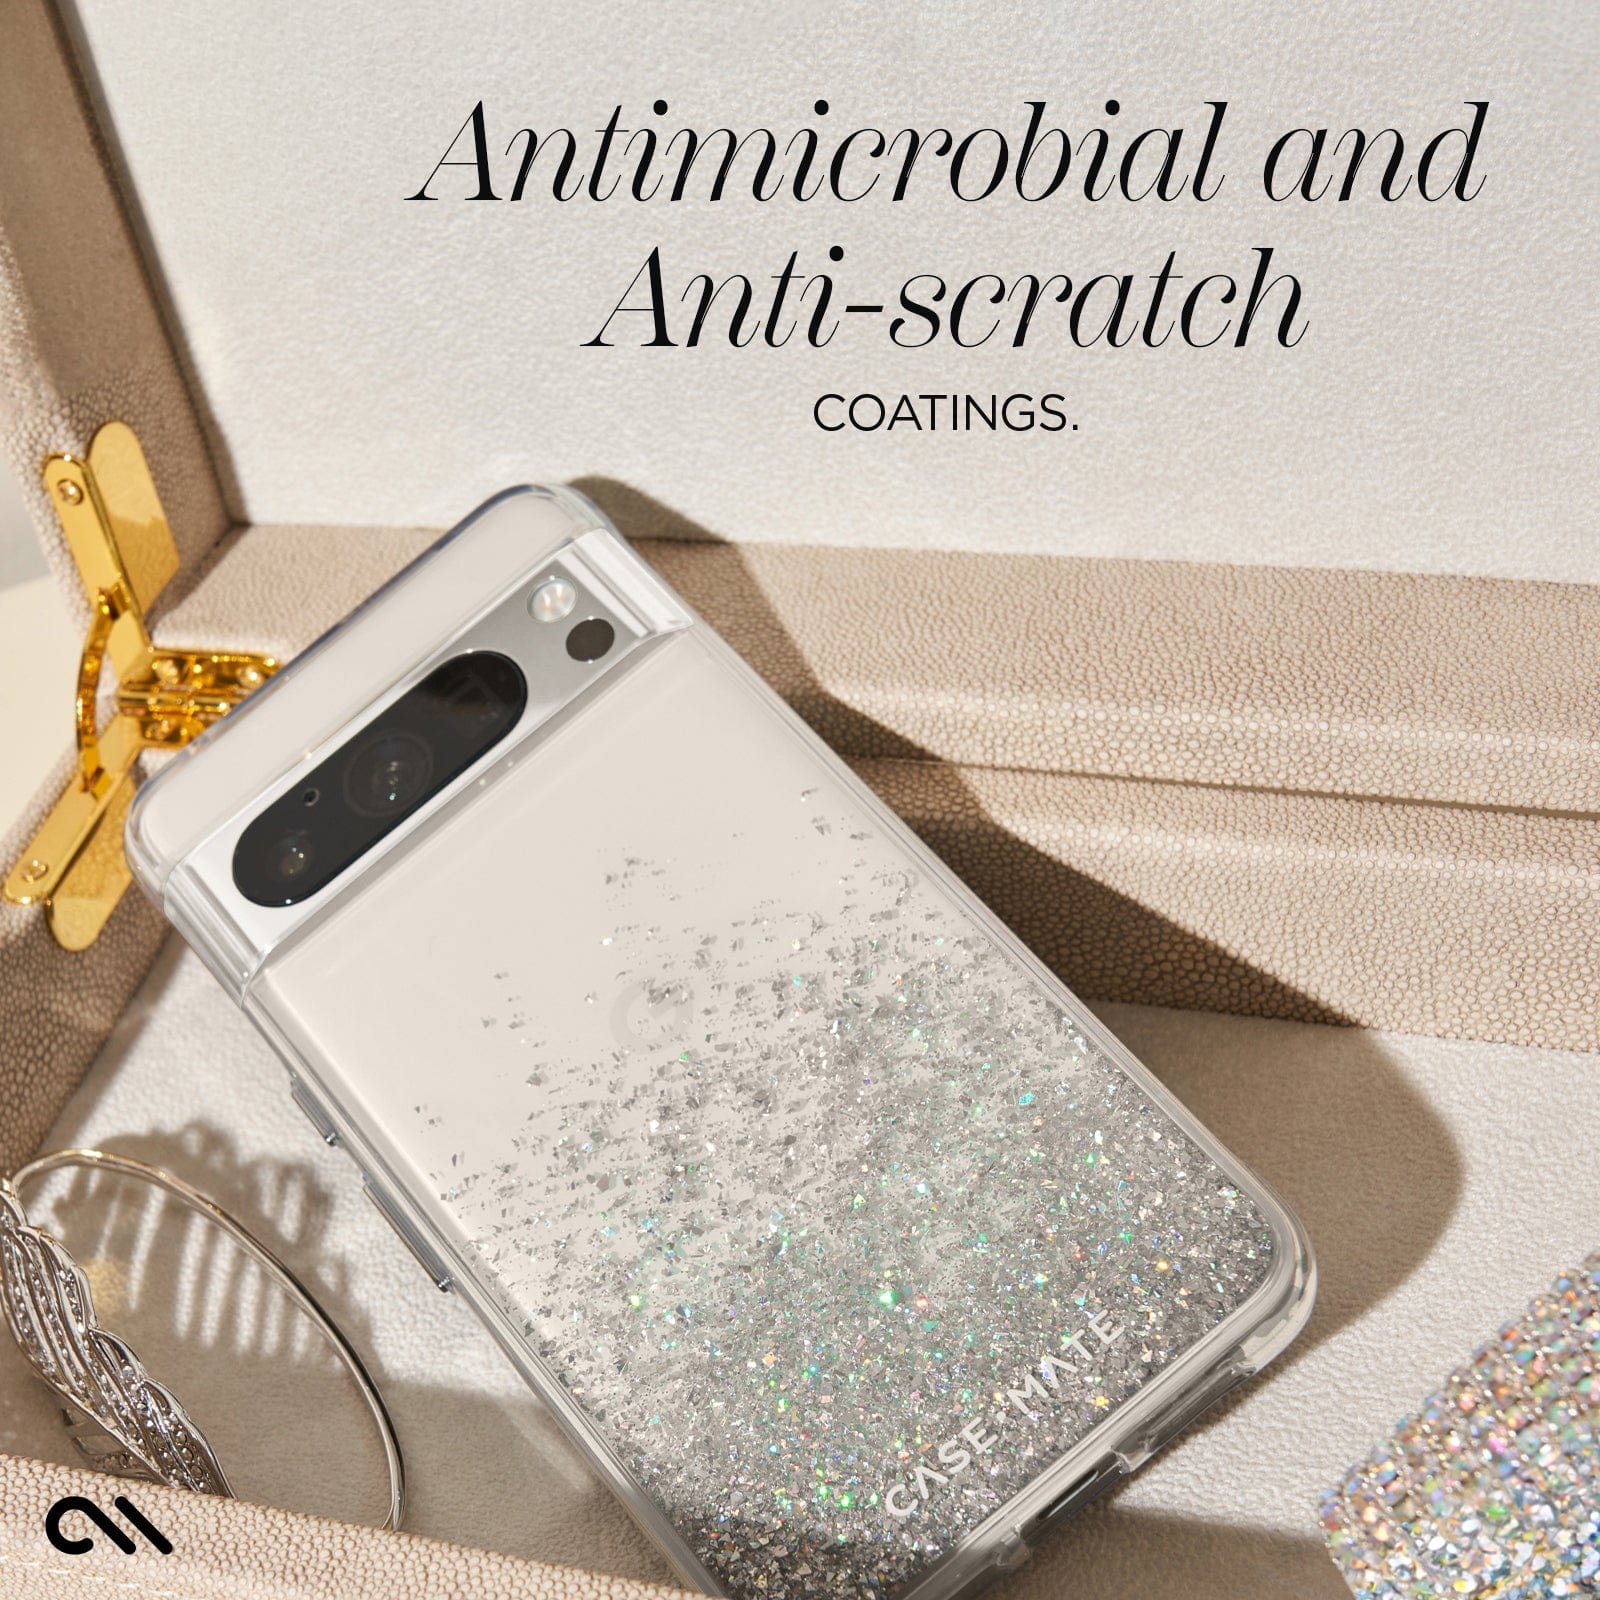 ANTIMICROBIAL AND ANTISCRATCH COATINGS